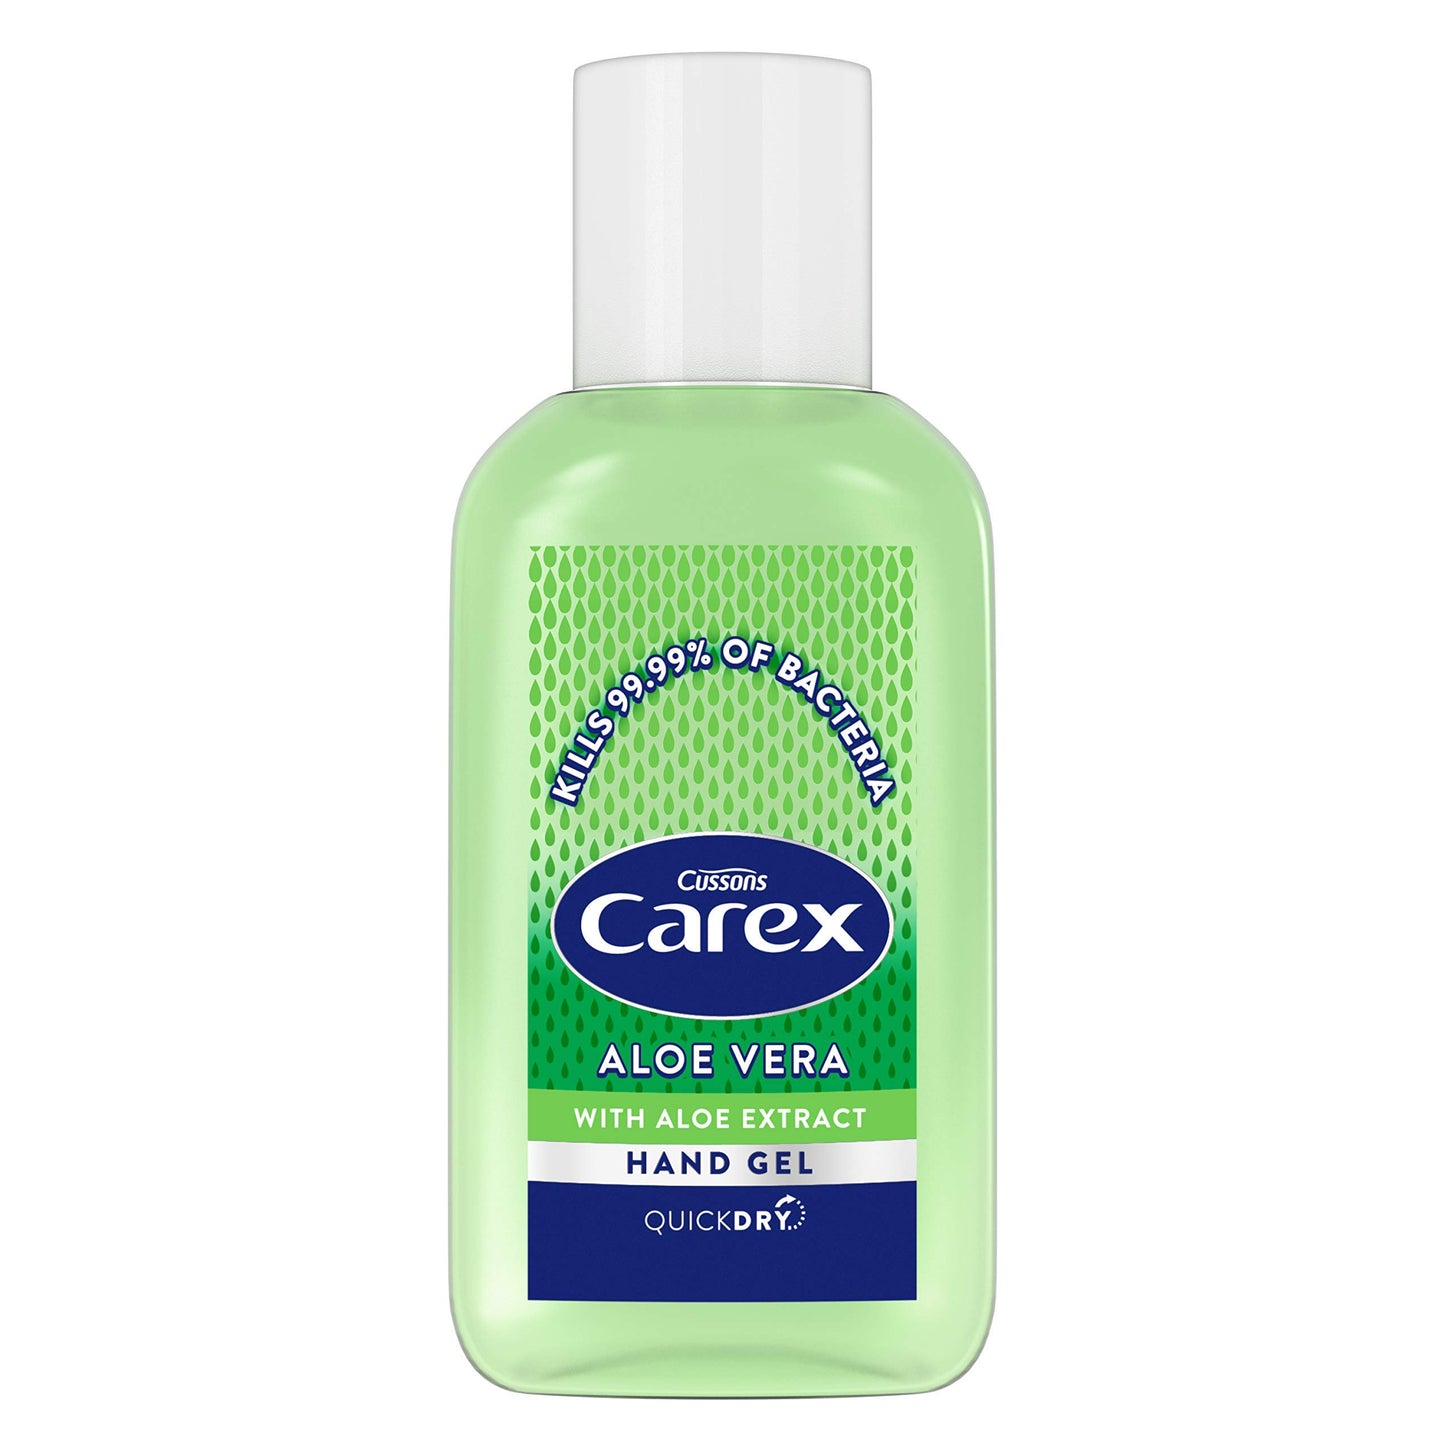 Carex Aloe Vera Antibacterial Hand Sanitiser Gel, Anti Viral Action, 70 Percent Alcohol, Cleans, Cares and Protects, Bulk Buy, Pack of 12 x 50 ml